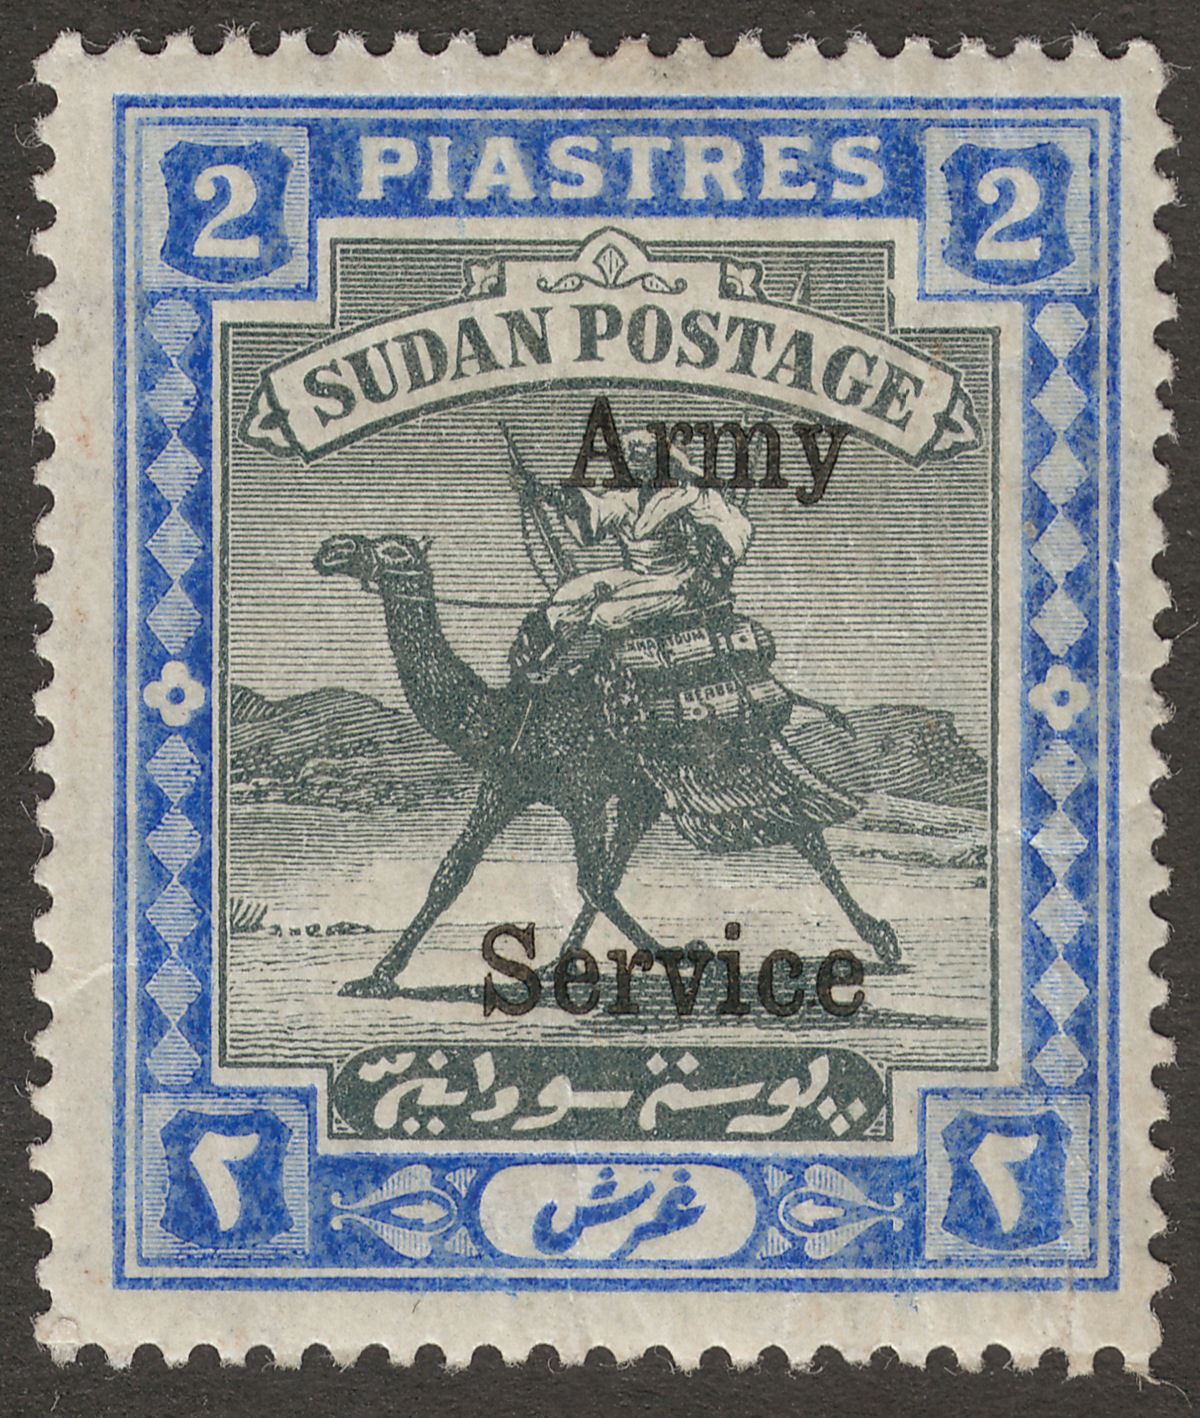 Sudan 1909 KEVII Army Service Overprint 2p Black and Blue Mint SG A11 cat £100